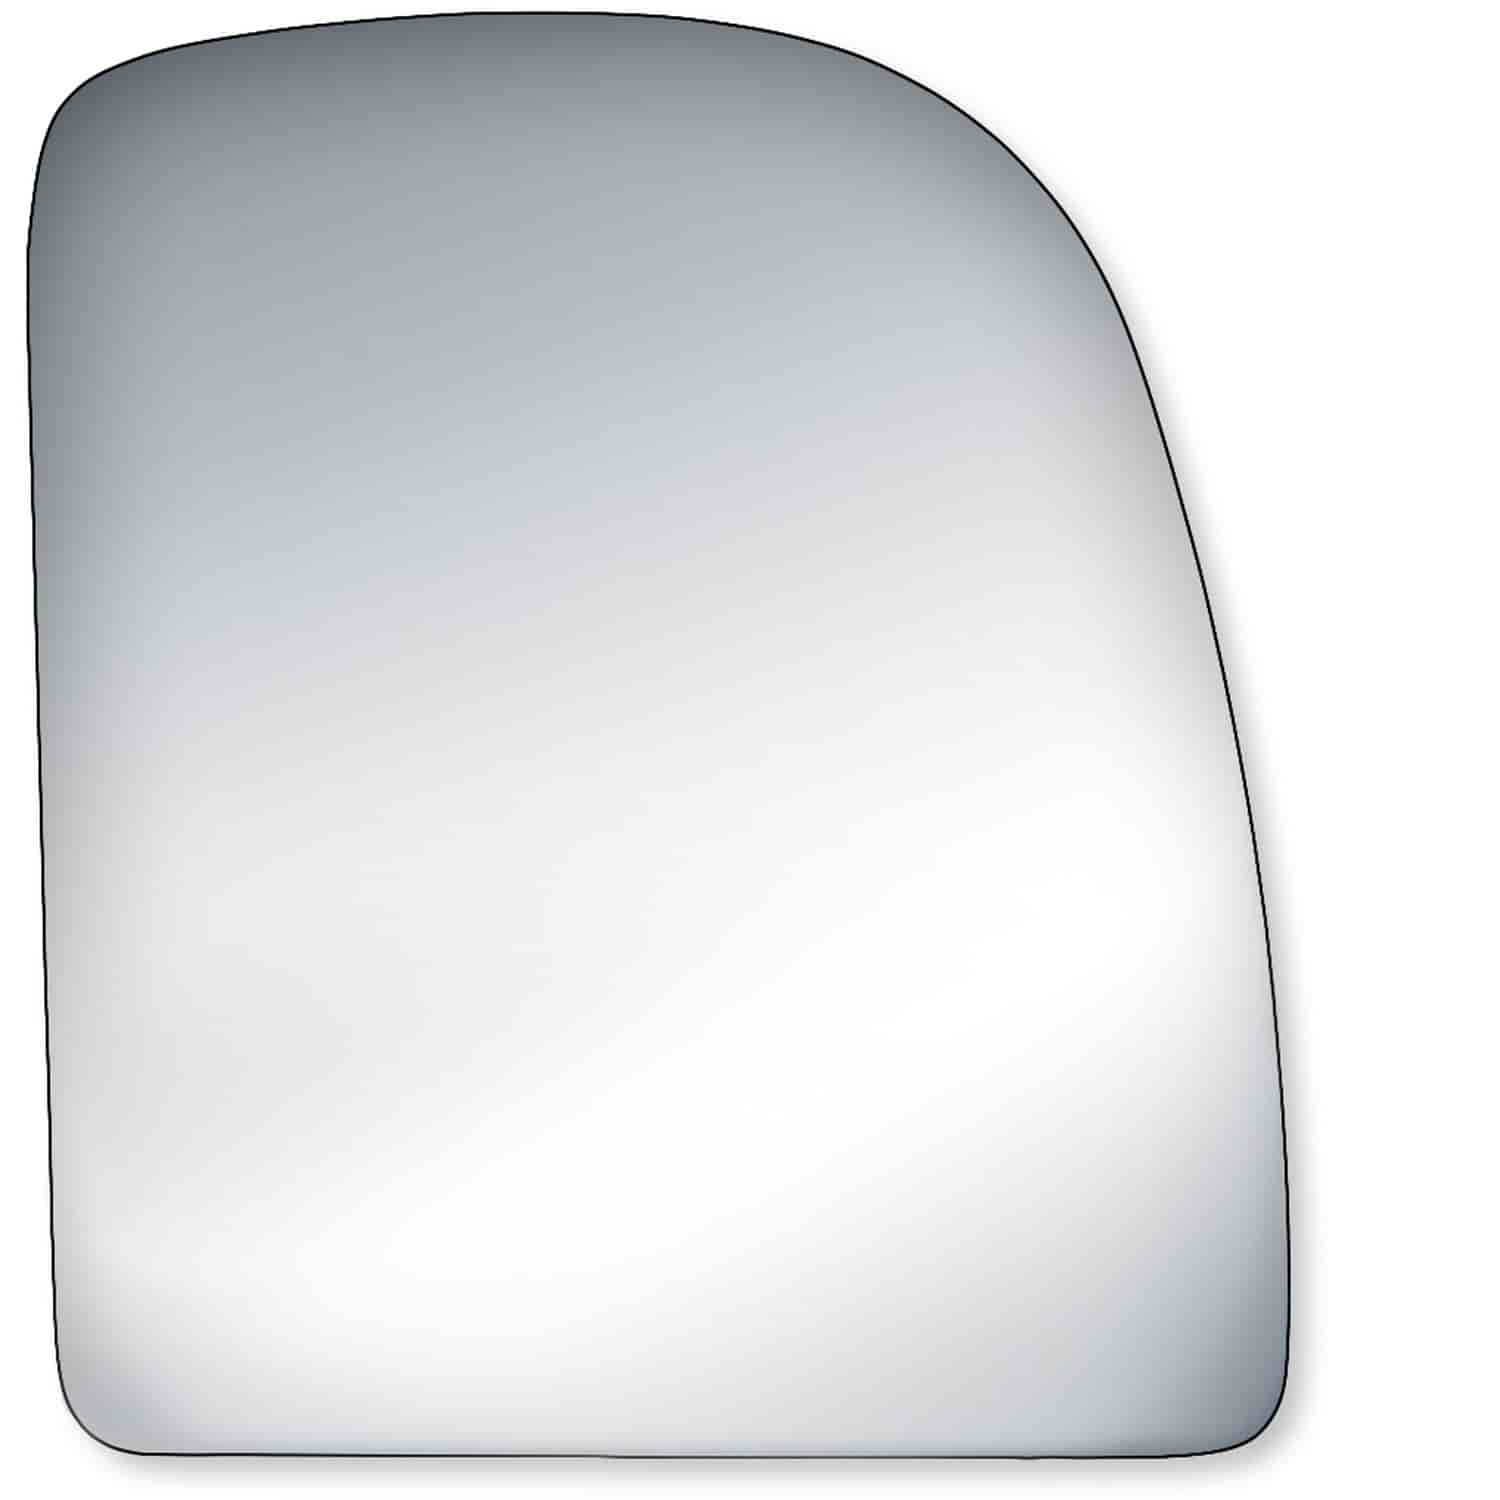 Replacement Glass for 08-14 Econoline towing mirror top lens ; 99-05 Excursion towing mirror top len